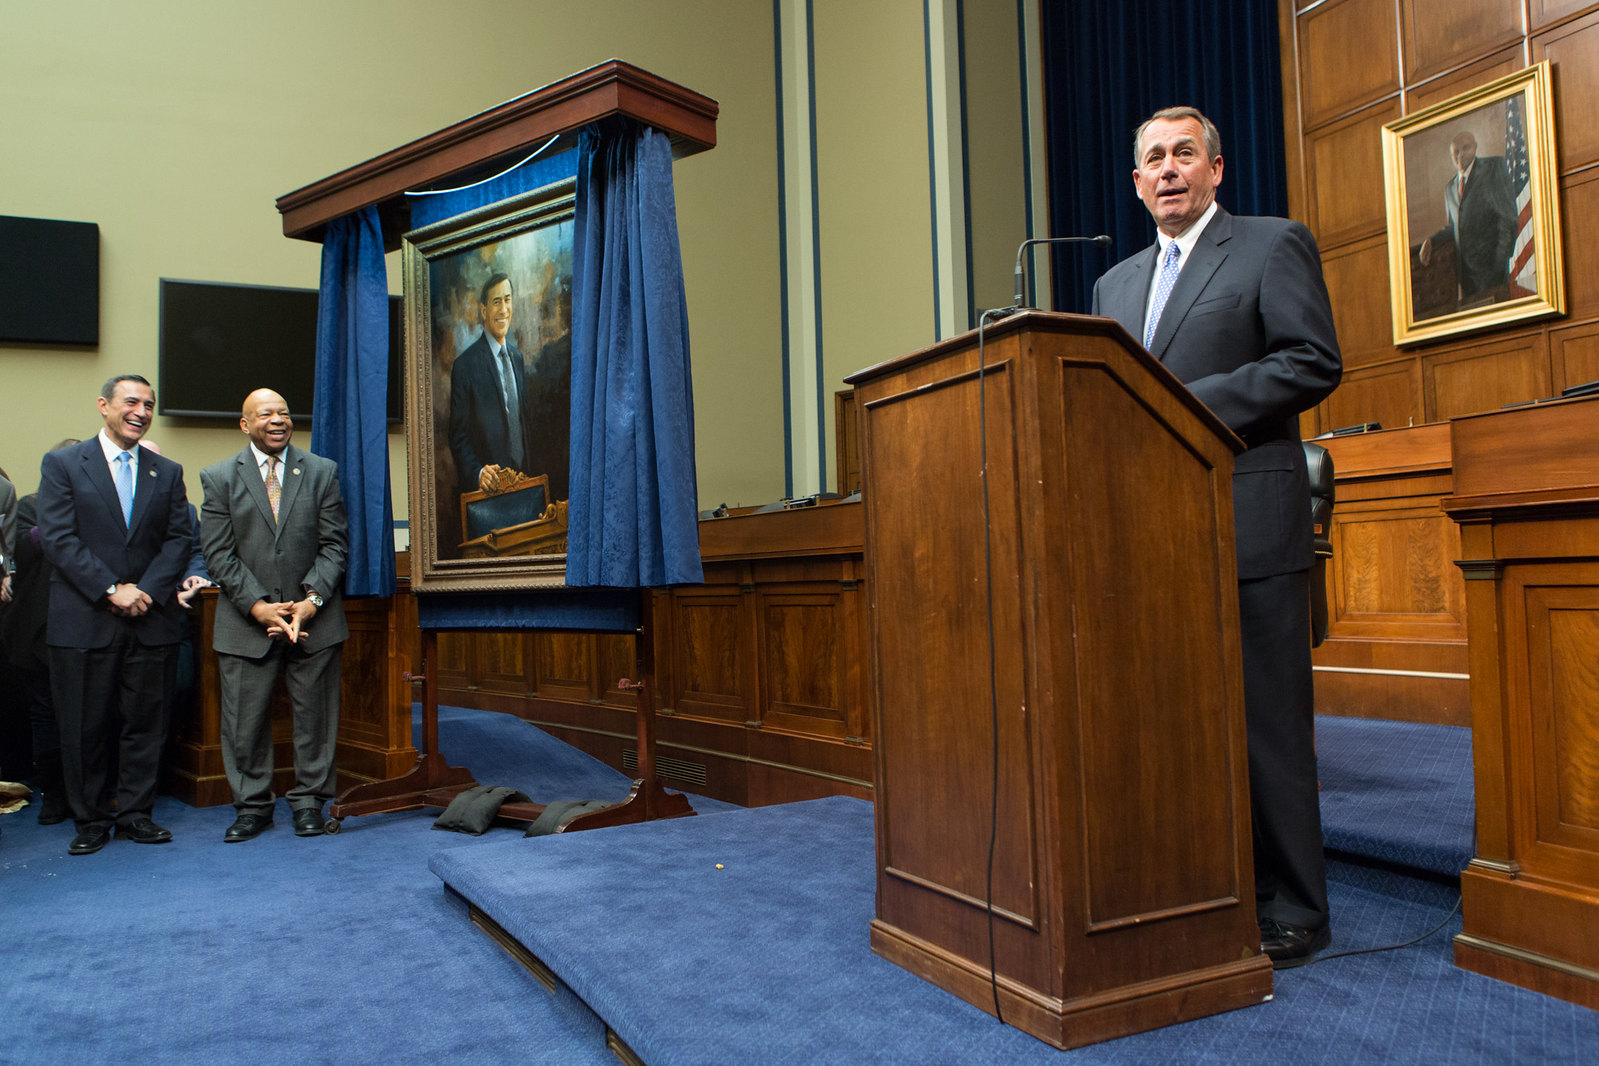 Speaker John Boehner accepts the portrait of Oversight and Government Reform Committee Chairman Darrell Issa (R-CA) into the House Committee.  Issa has served as Chairman since 2011.